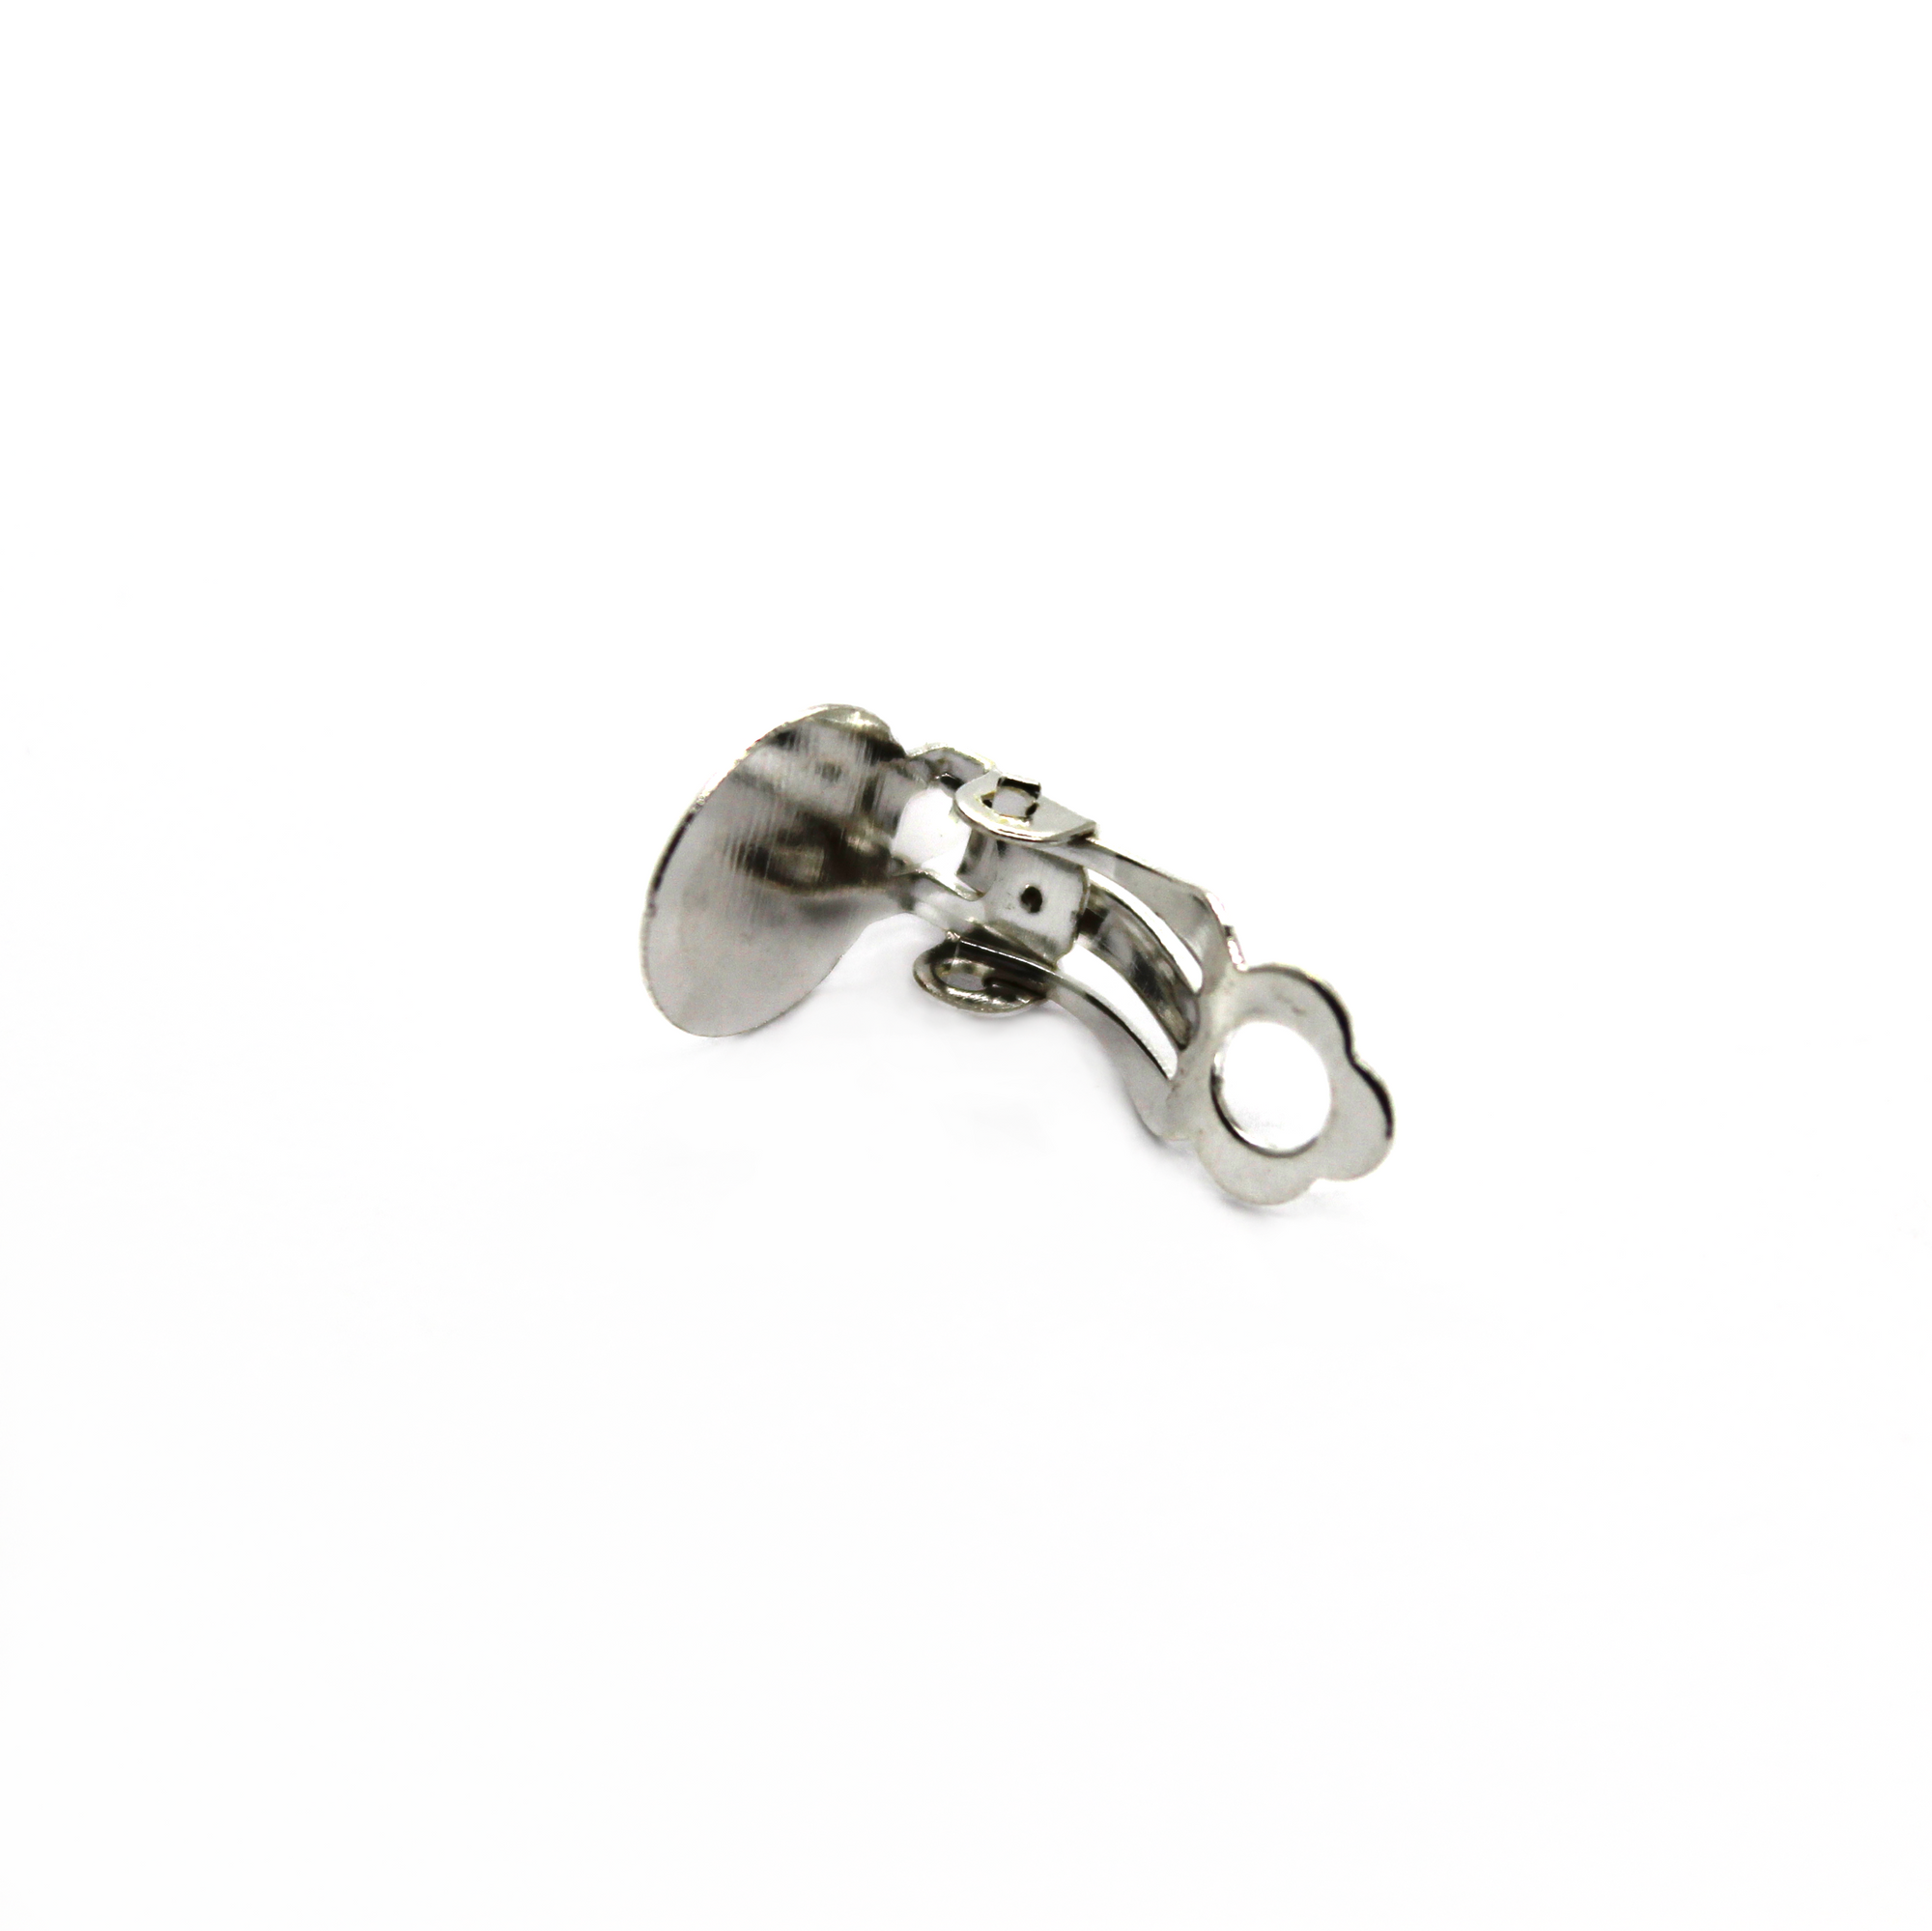 Earrings, Bright Silver, Alloy, Plain Clip-Ons, 10mm x 18mm, sold per pkg of 4 pairs